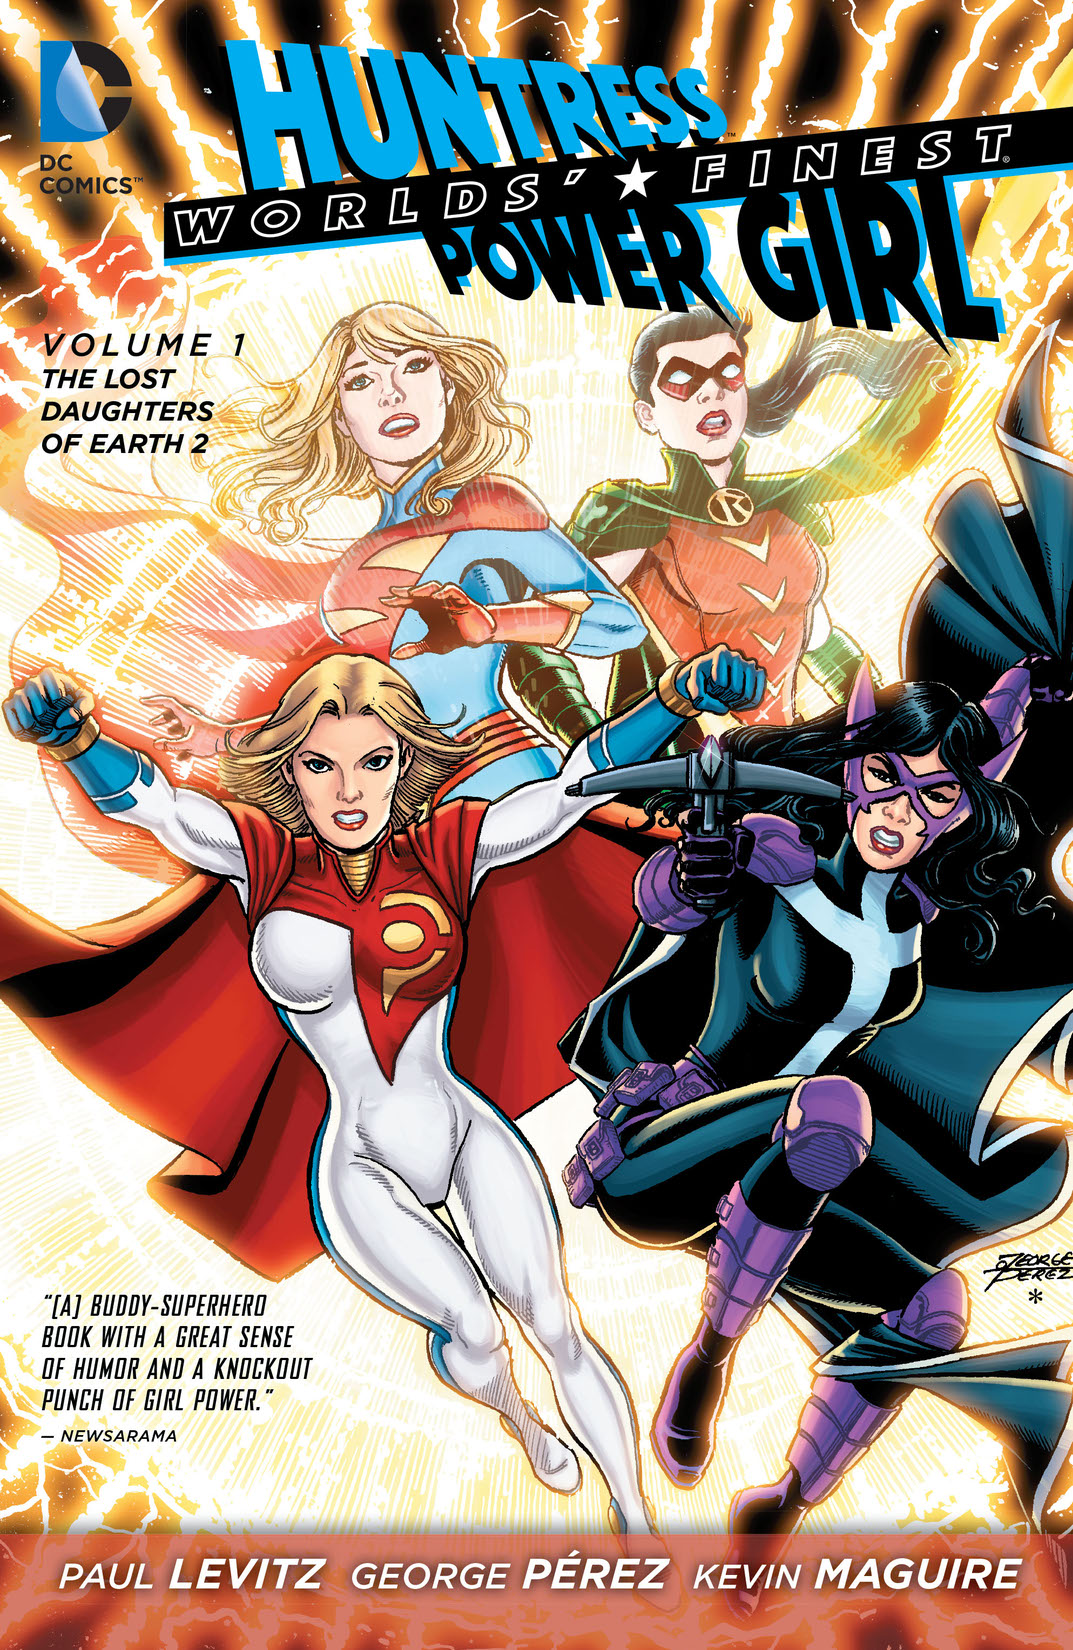 Worlds' Finest Vol. 1: The Lost Daughters of Earth 2 preview images